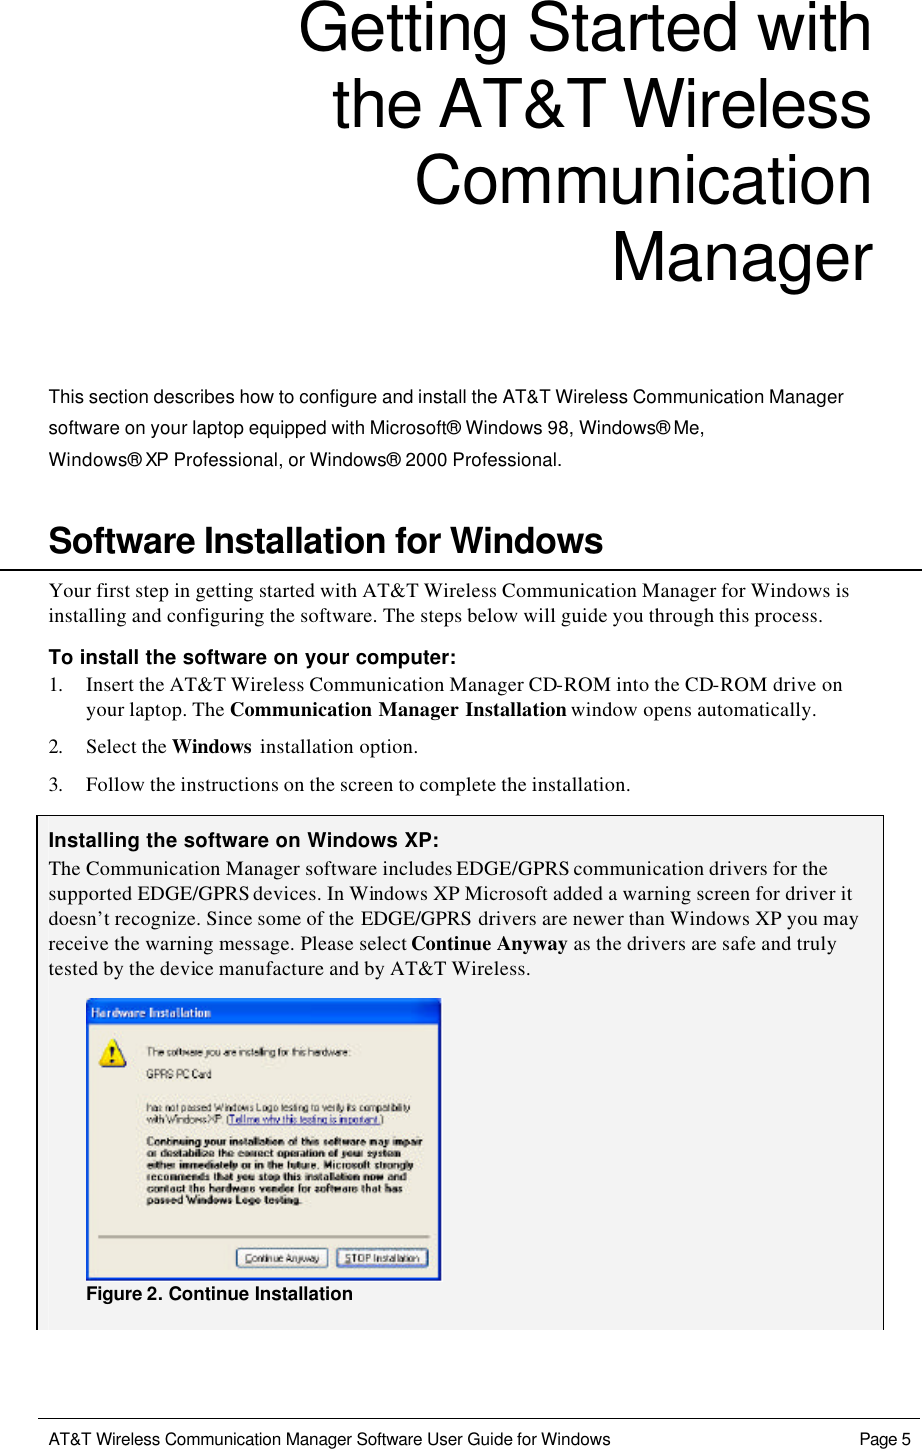   AT&amp;T Wireless Communication Manager Software User Guide for Windows    Page 5  Getting Started with the AT&amp;T Wireless Communication Manager  This section describes how to configure and install the AT&amp;T Wireless Communication Manager software on your laptop equipped with Microsoft® Windows 98, Windows® Me,  Windows® XP Professional, or Windows® 2000 Professional.    Software Installation for Windows Your first step in getting started with AT&amp;T Wireless Communication Manager for Windows is installing and configuring the software. The steps below will guide you through this process. To install the software on your computer: 1. Insert the AT&amp;T Wireless Communication Manager CD-ROM into the CD-ROM drive on your laptop. The Communication Manager Installation window opens automatically. 2. Select the Windows  installation option. 3. Follow the instructions on the screen to complete the installation.  Installing the software on Windows XP: The Communication Manager software includes EDGE/GPRS communication drivers for the supported EDGE/GPRS devices. In Windows XP Microsoft added a warning screen for driver it doesn’t recognize. Since some of the EDGE/GPRS drivers are newer than Windows XP you may receive the warning message. Please select Continue Anyway as the drivers are safe and truly tested by the device manufacture and by AT&amp;T Wireless.  Figure 2. Continue Installation 